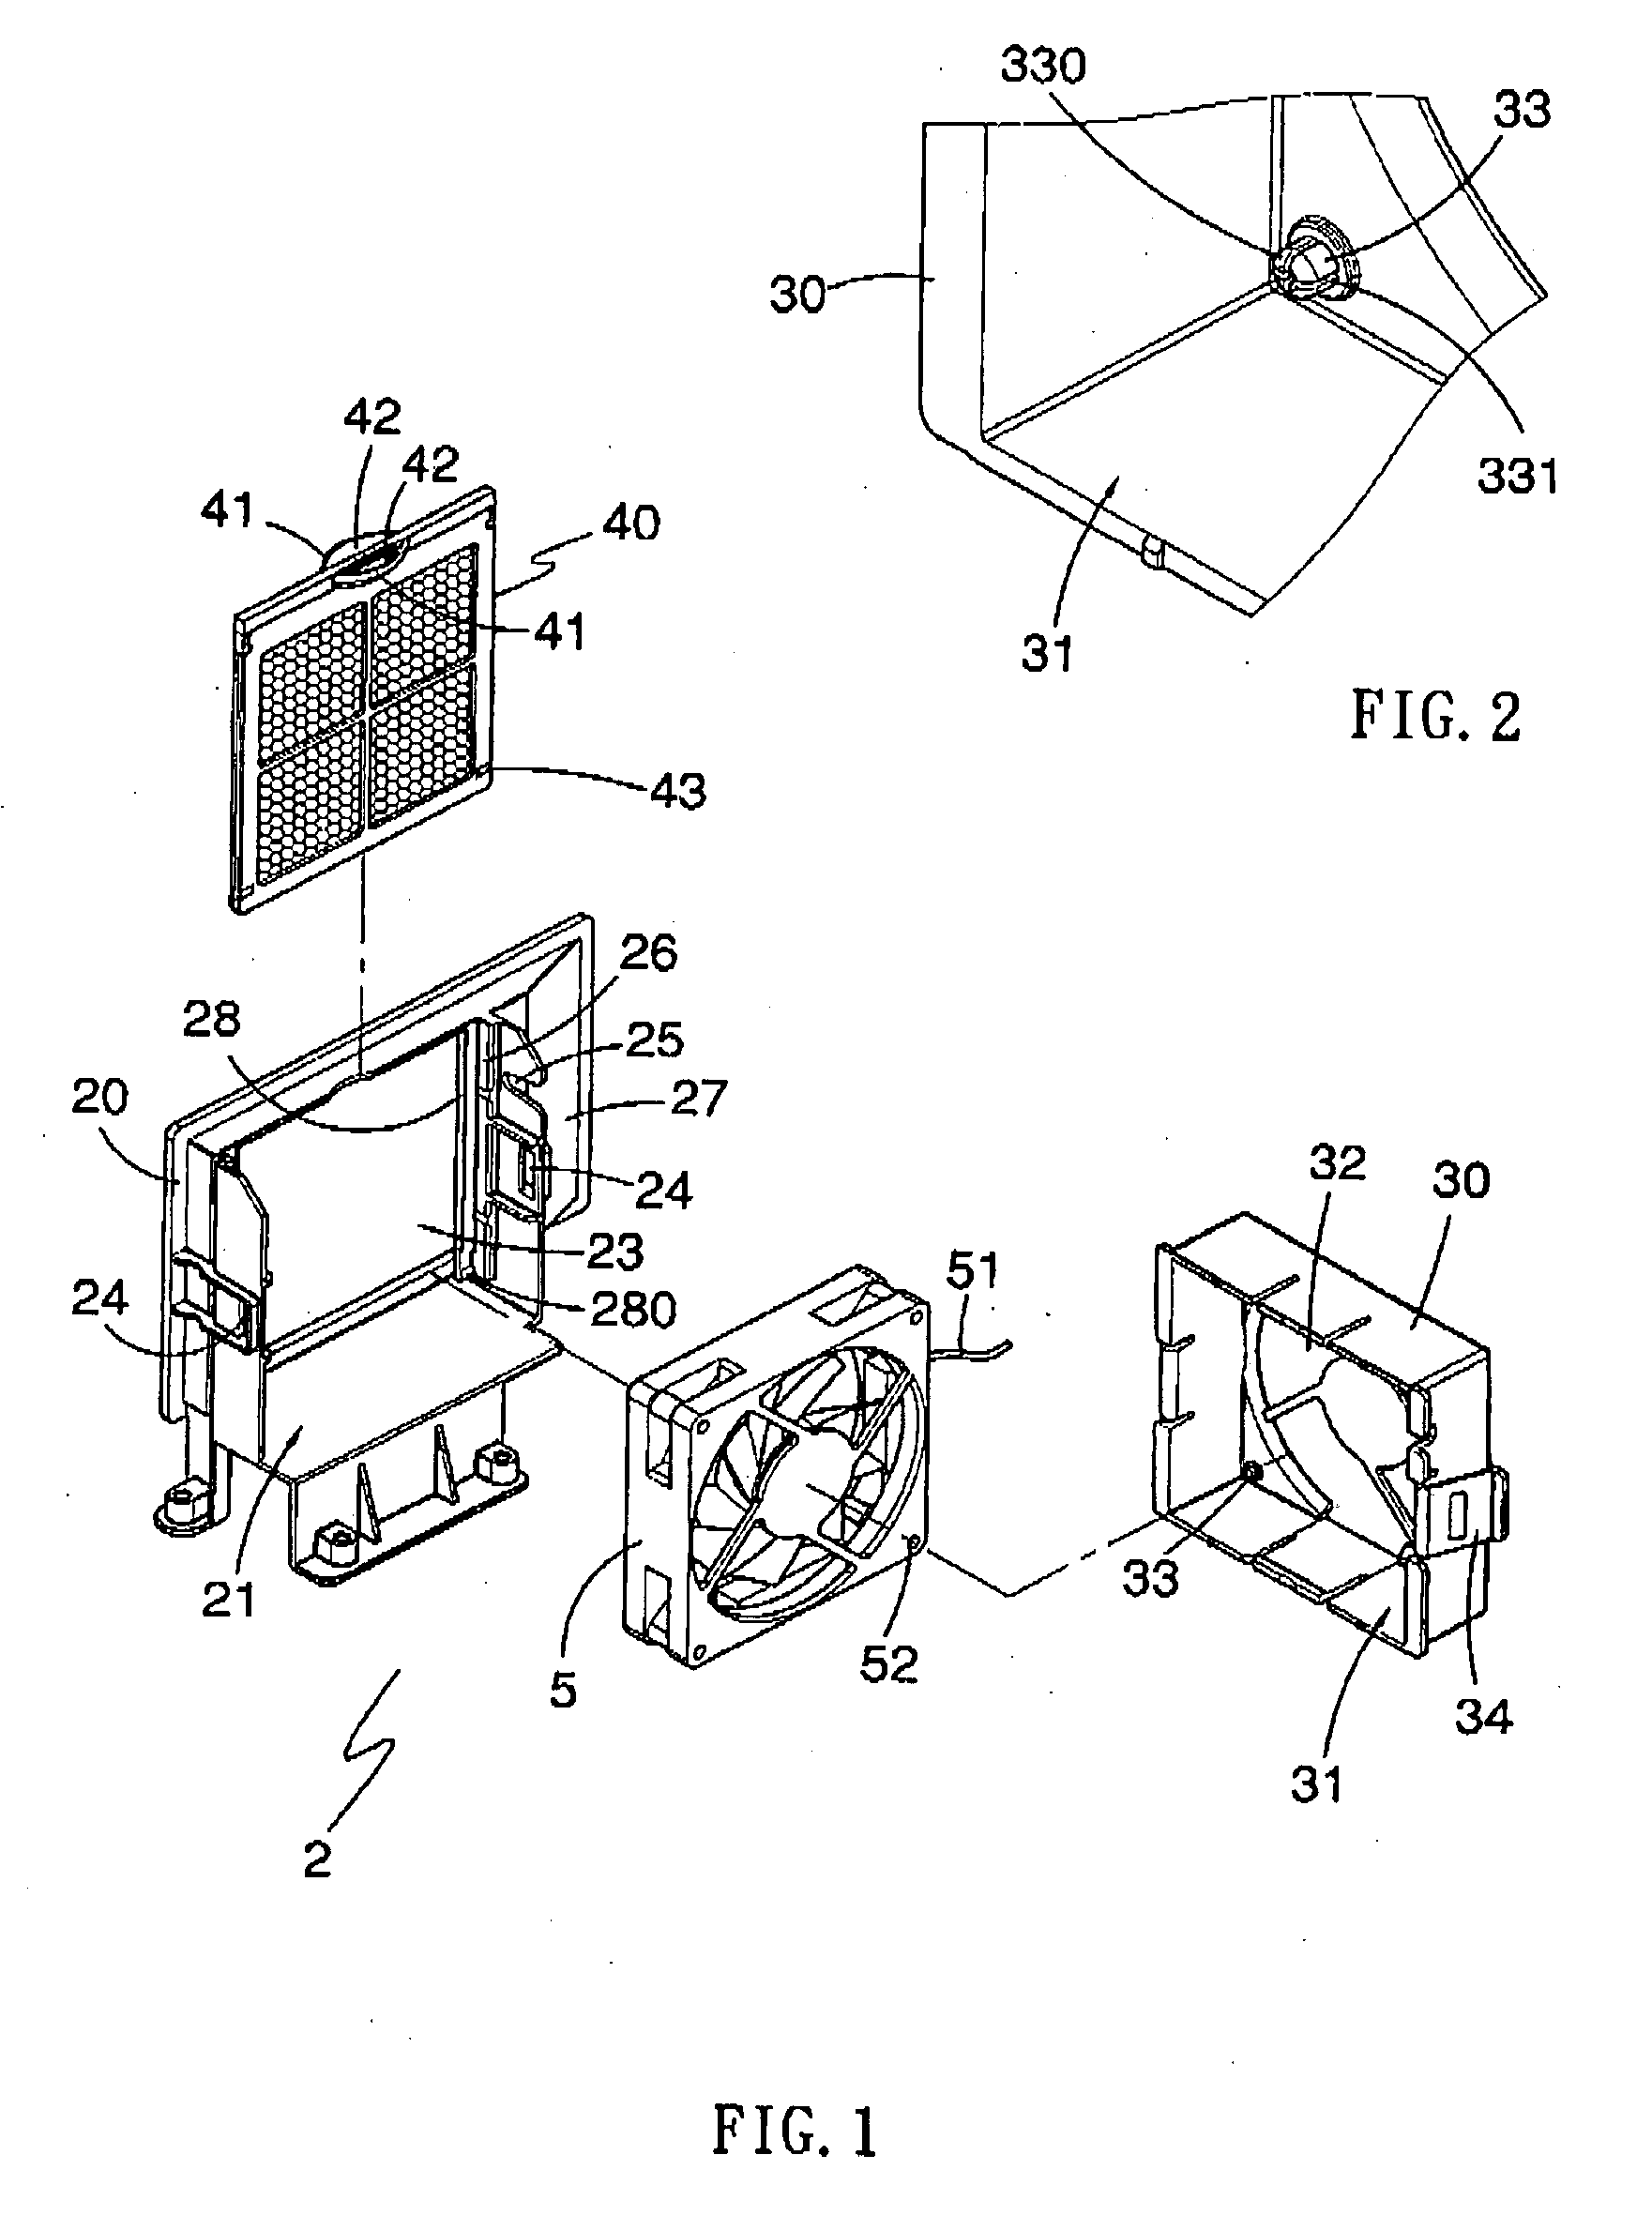 Fan fixture and housing assembly containing the fan fixture